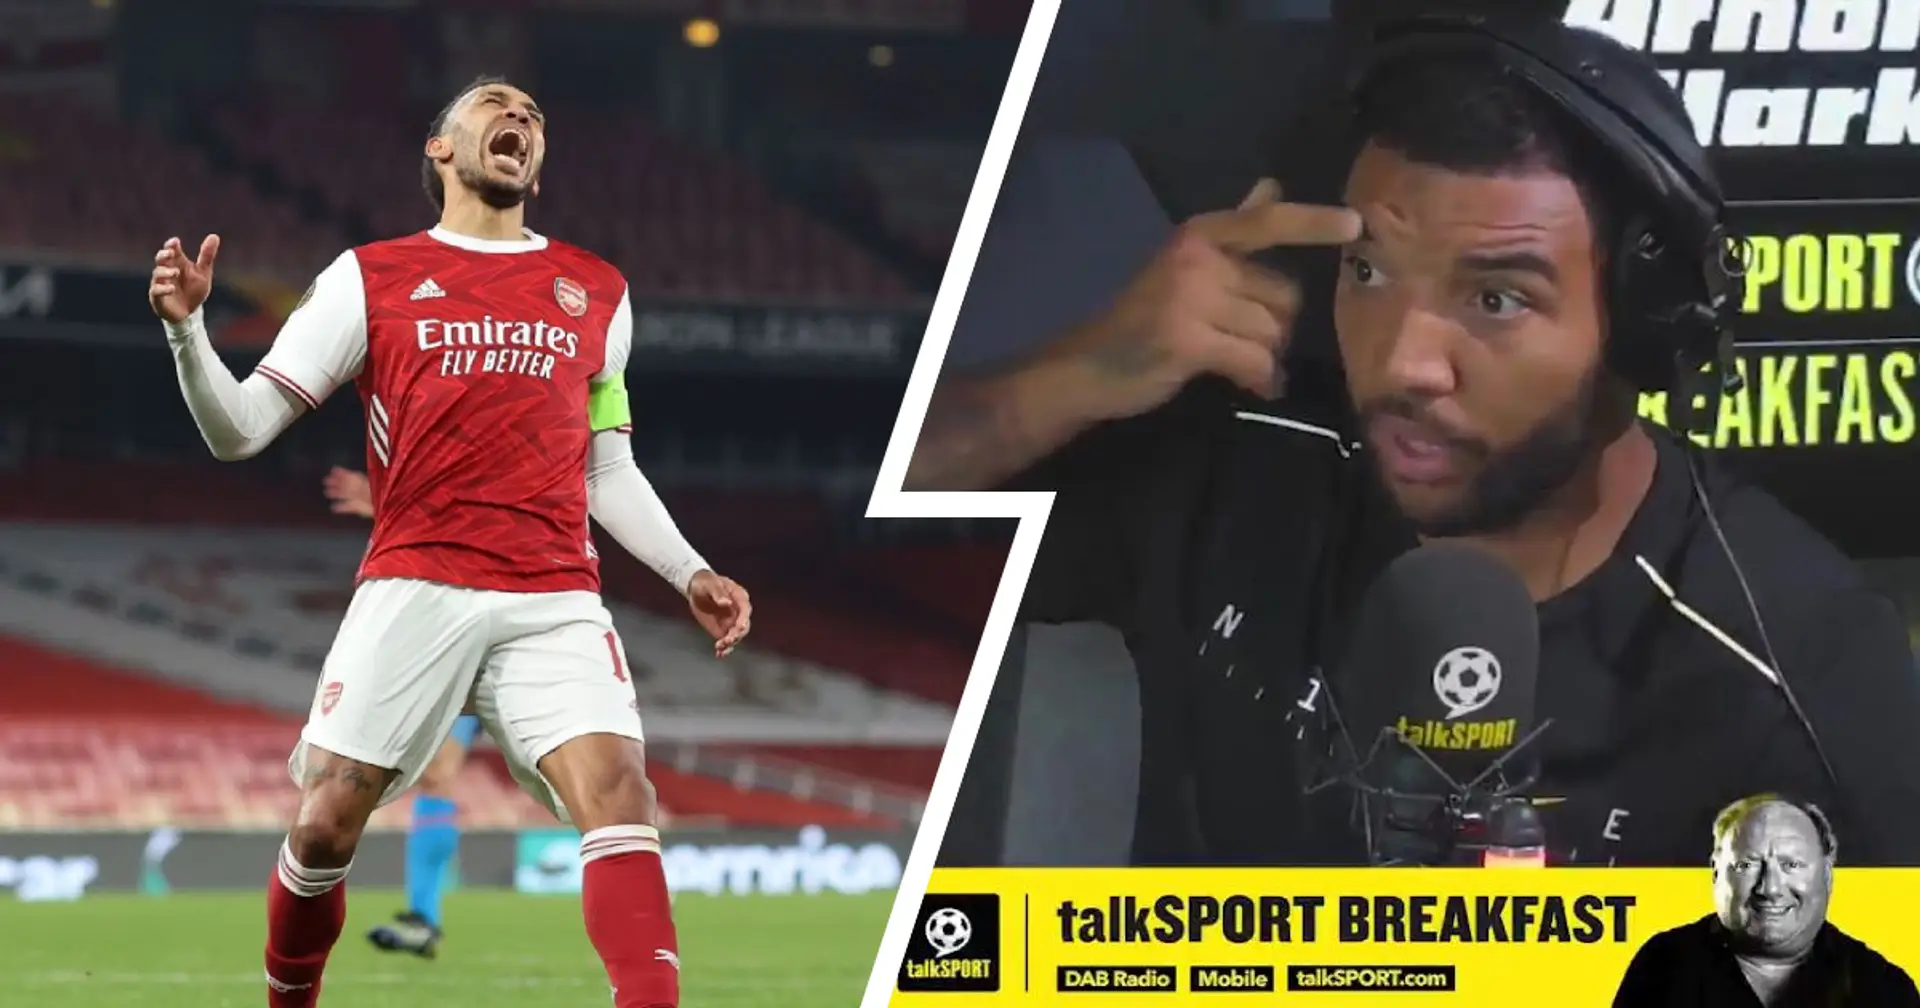 'The contract stuff affected him': Troy Deeney explains Aubameyang's dip in form